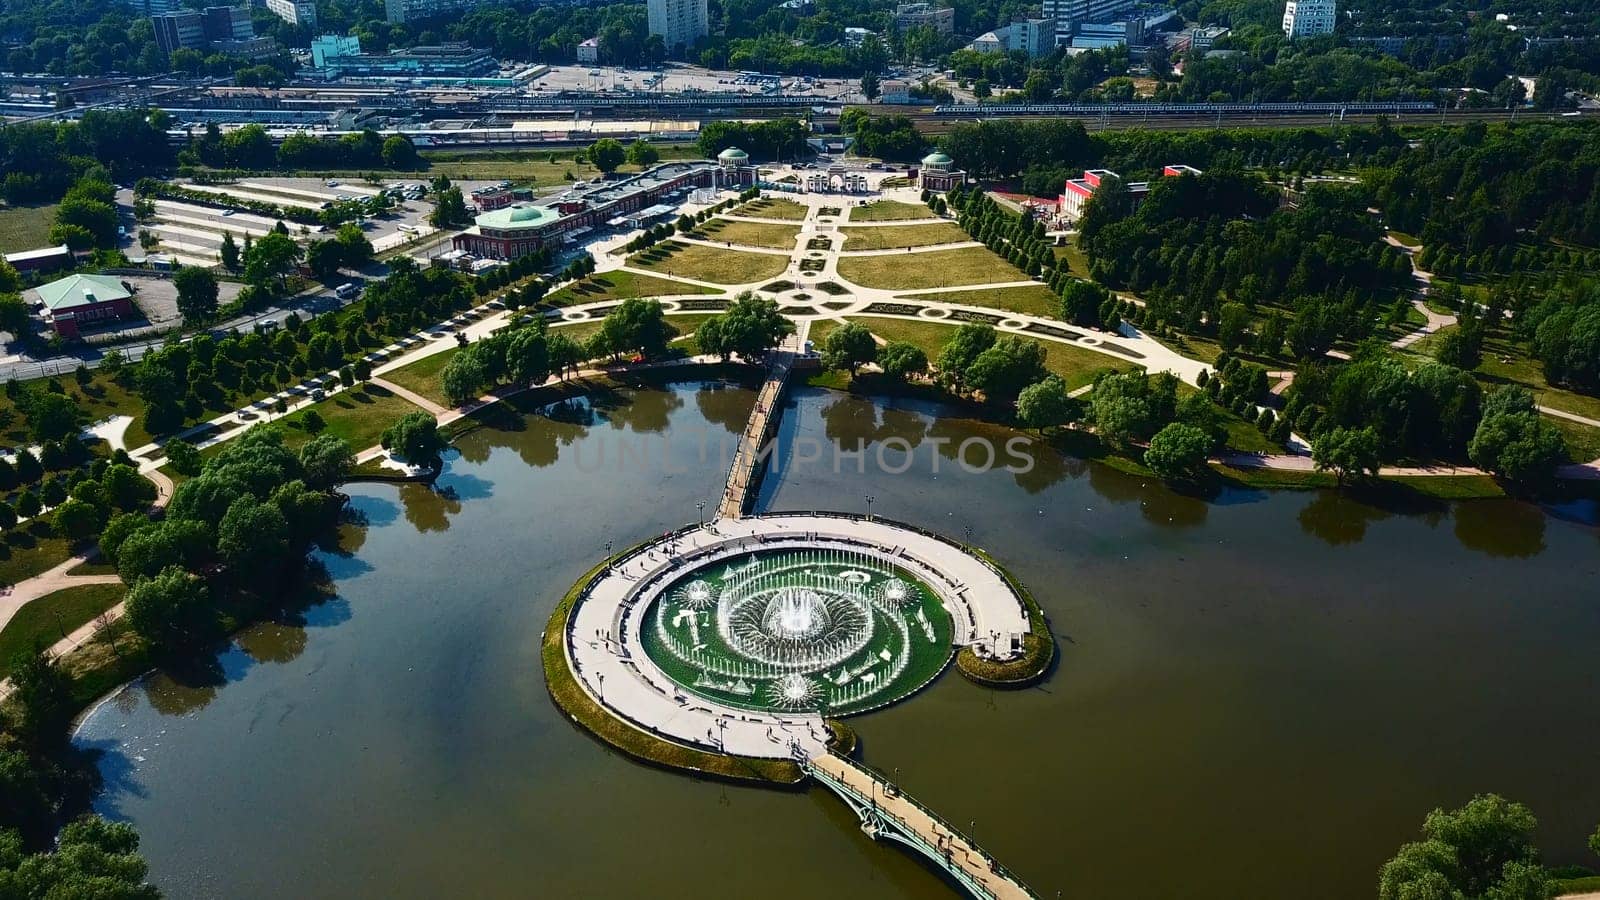 Geometric landscape paths and fountains. Creative. Top view of ornamental park with paths and fountain. Historical park with fountain in pond and luxurious geometric alley.